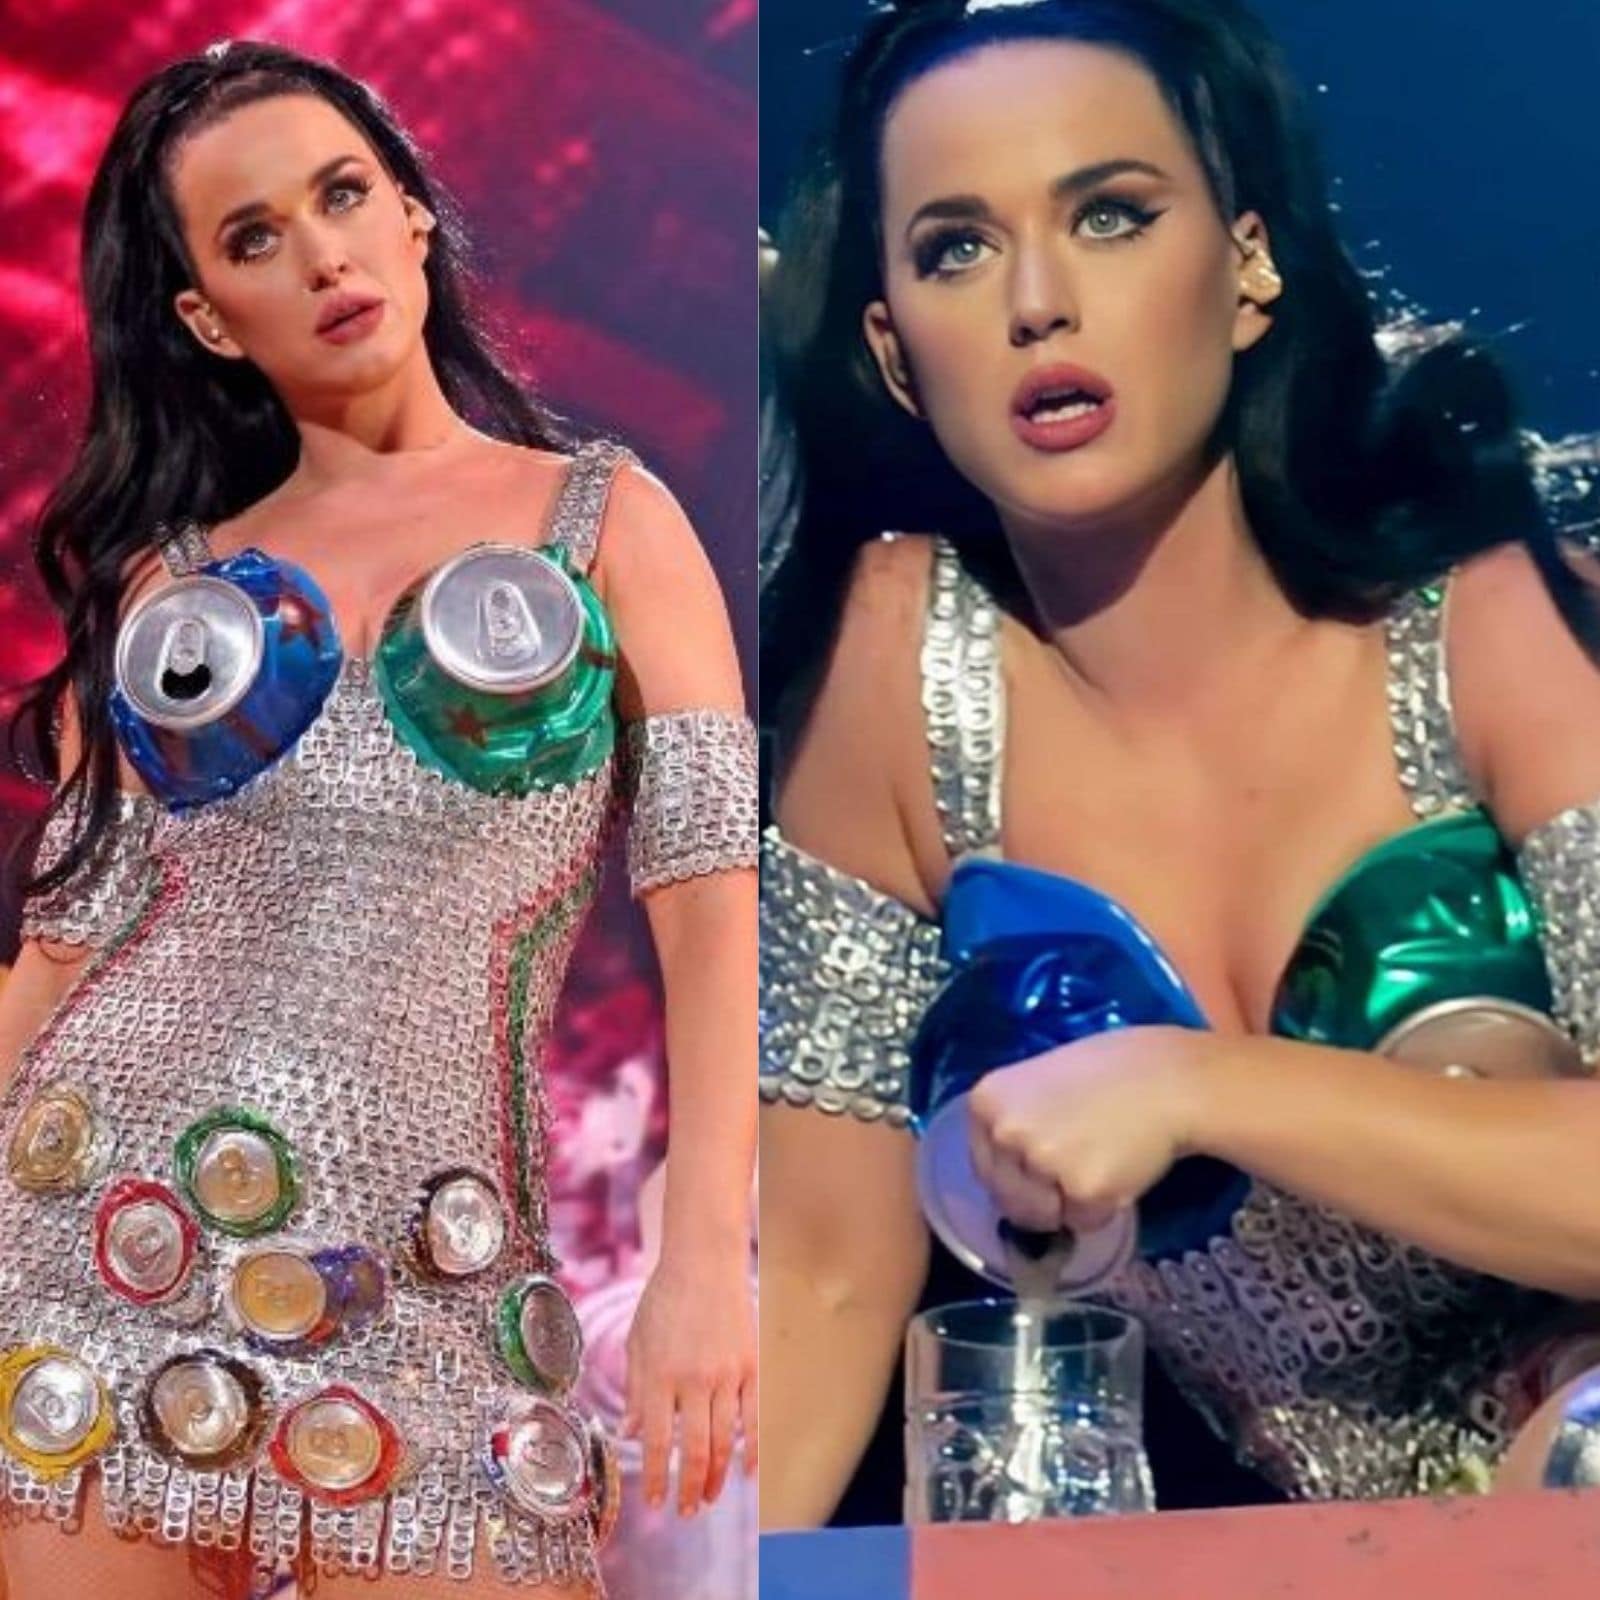 Katy Perry Dons Beer Can Bra During Las Vegas Concert, Pours a